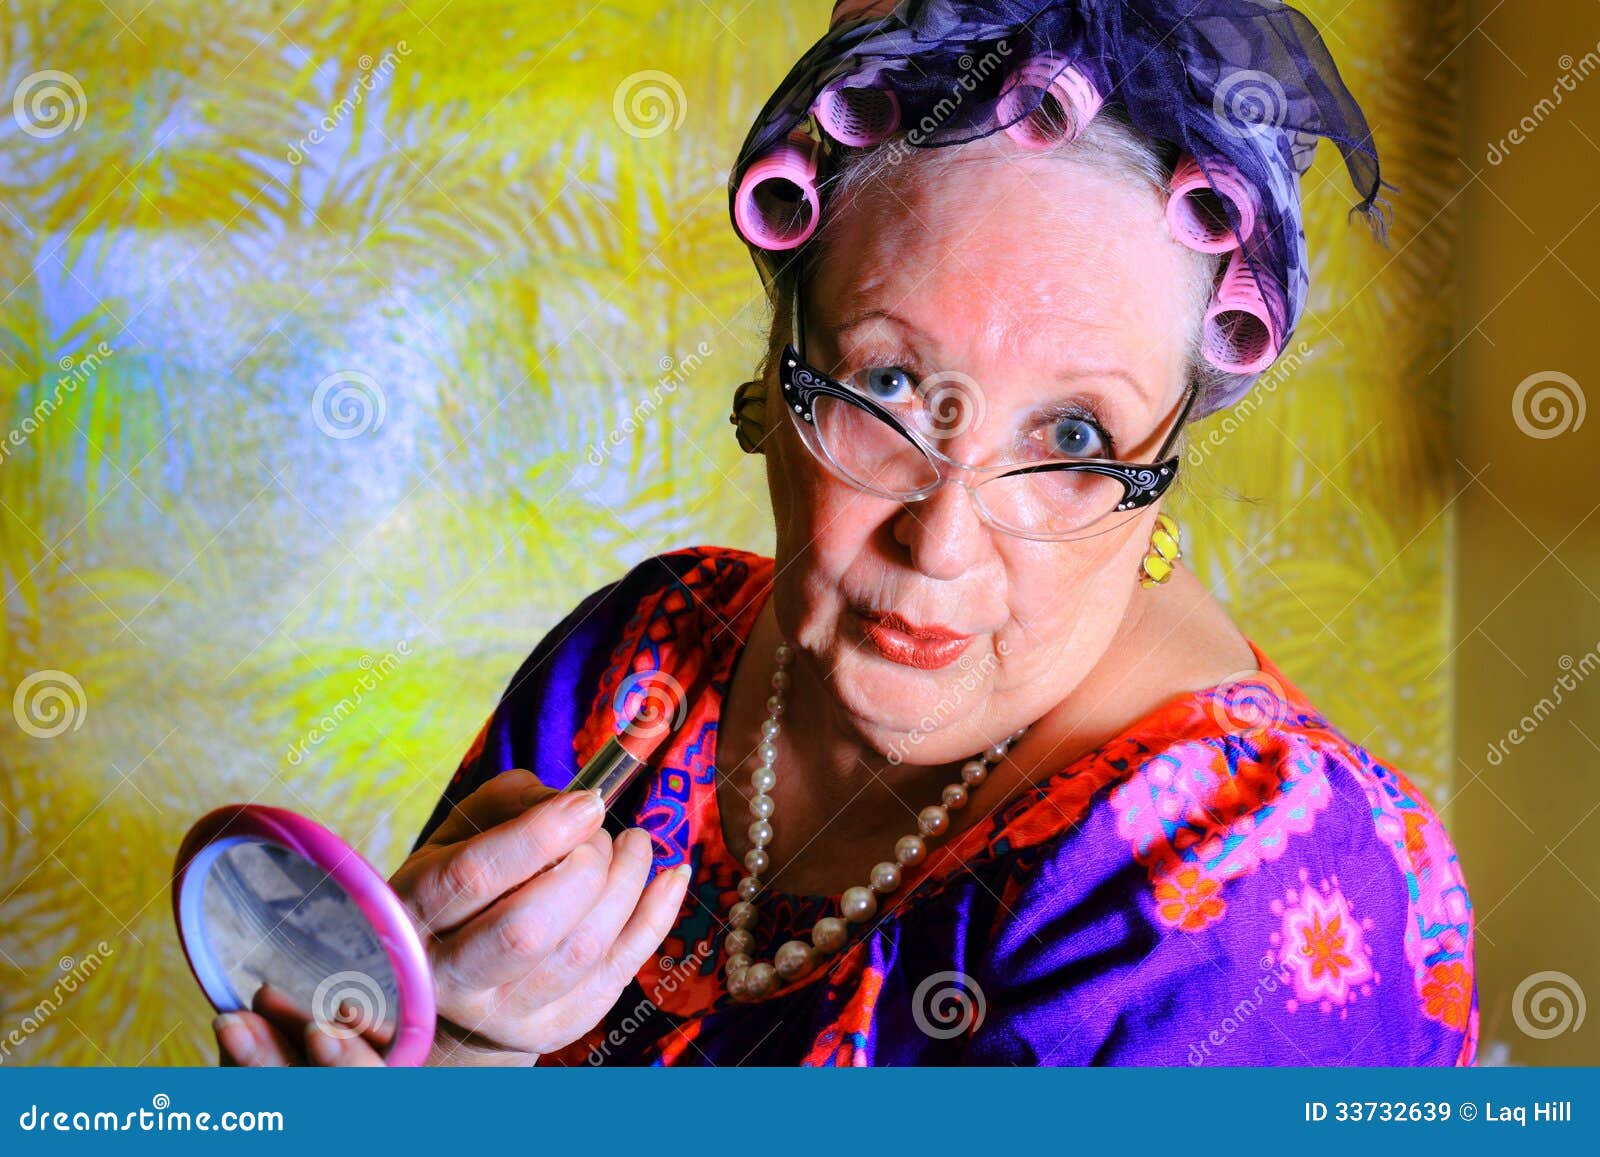 Grannies Wearing Only Glasses